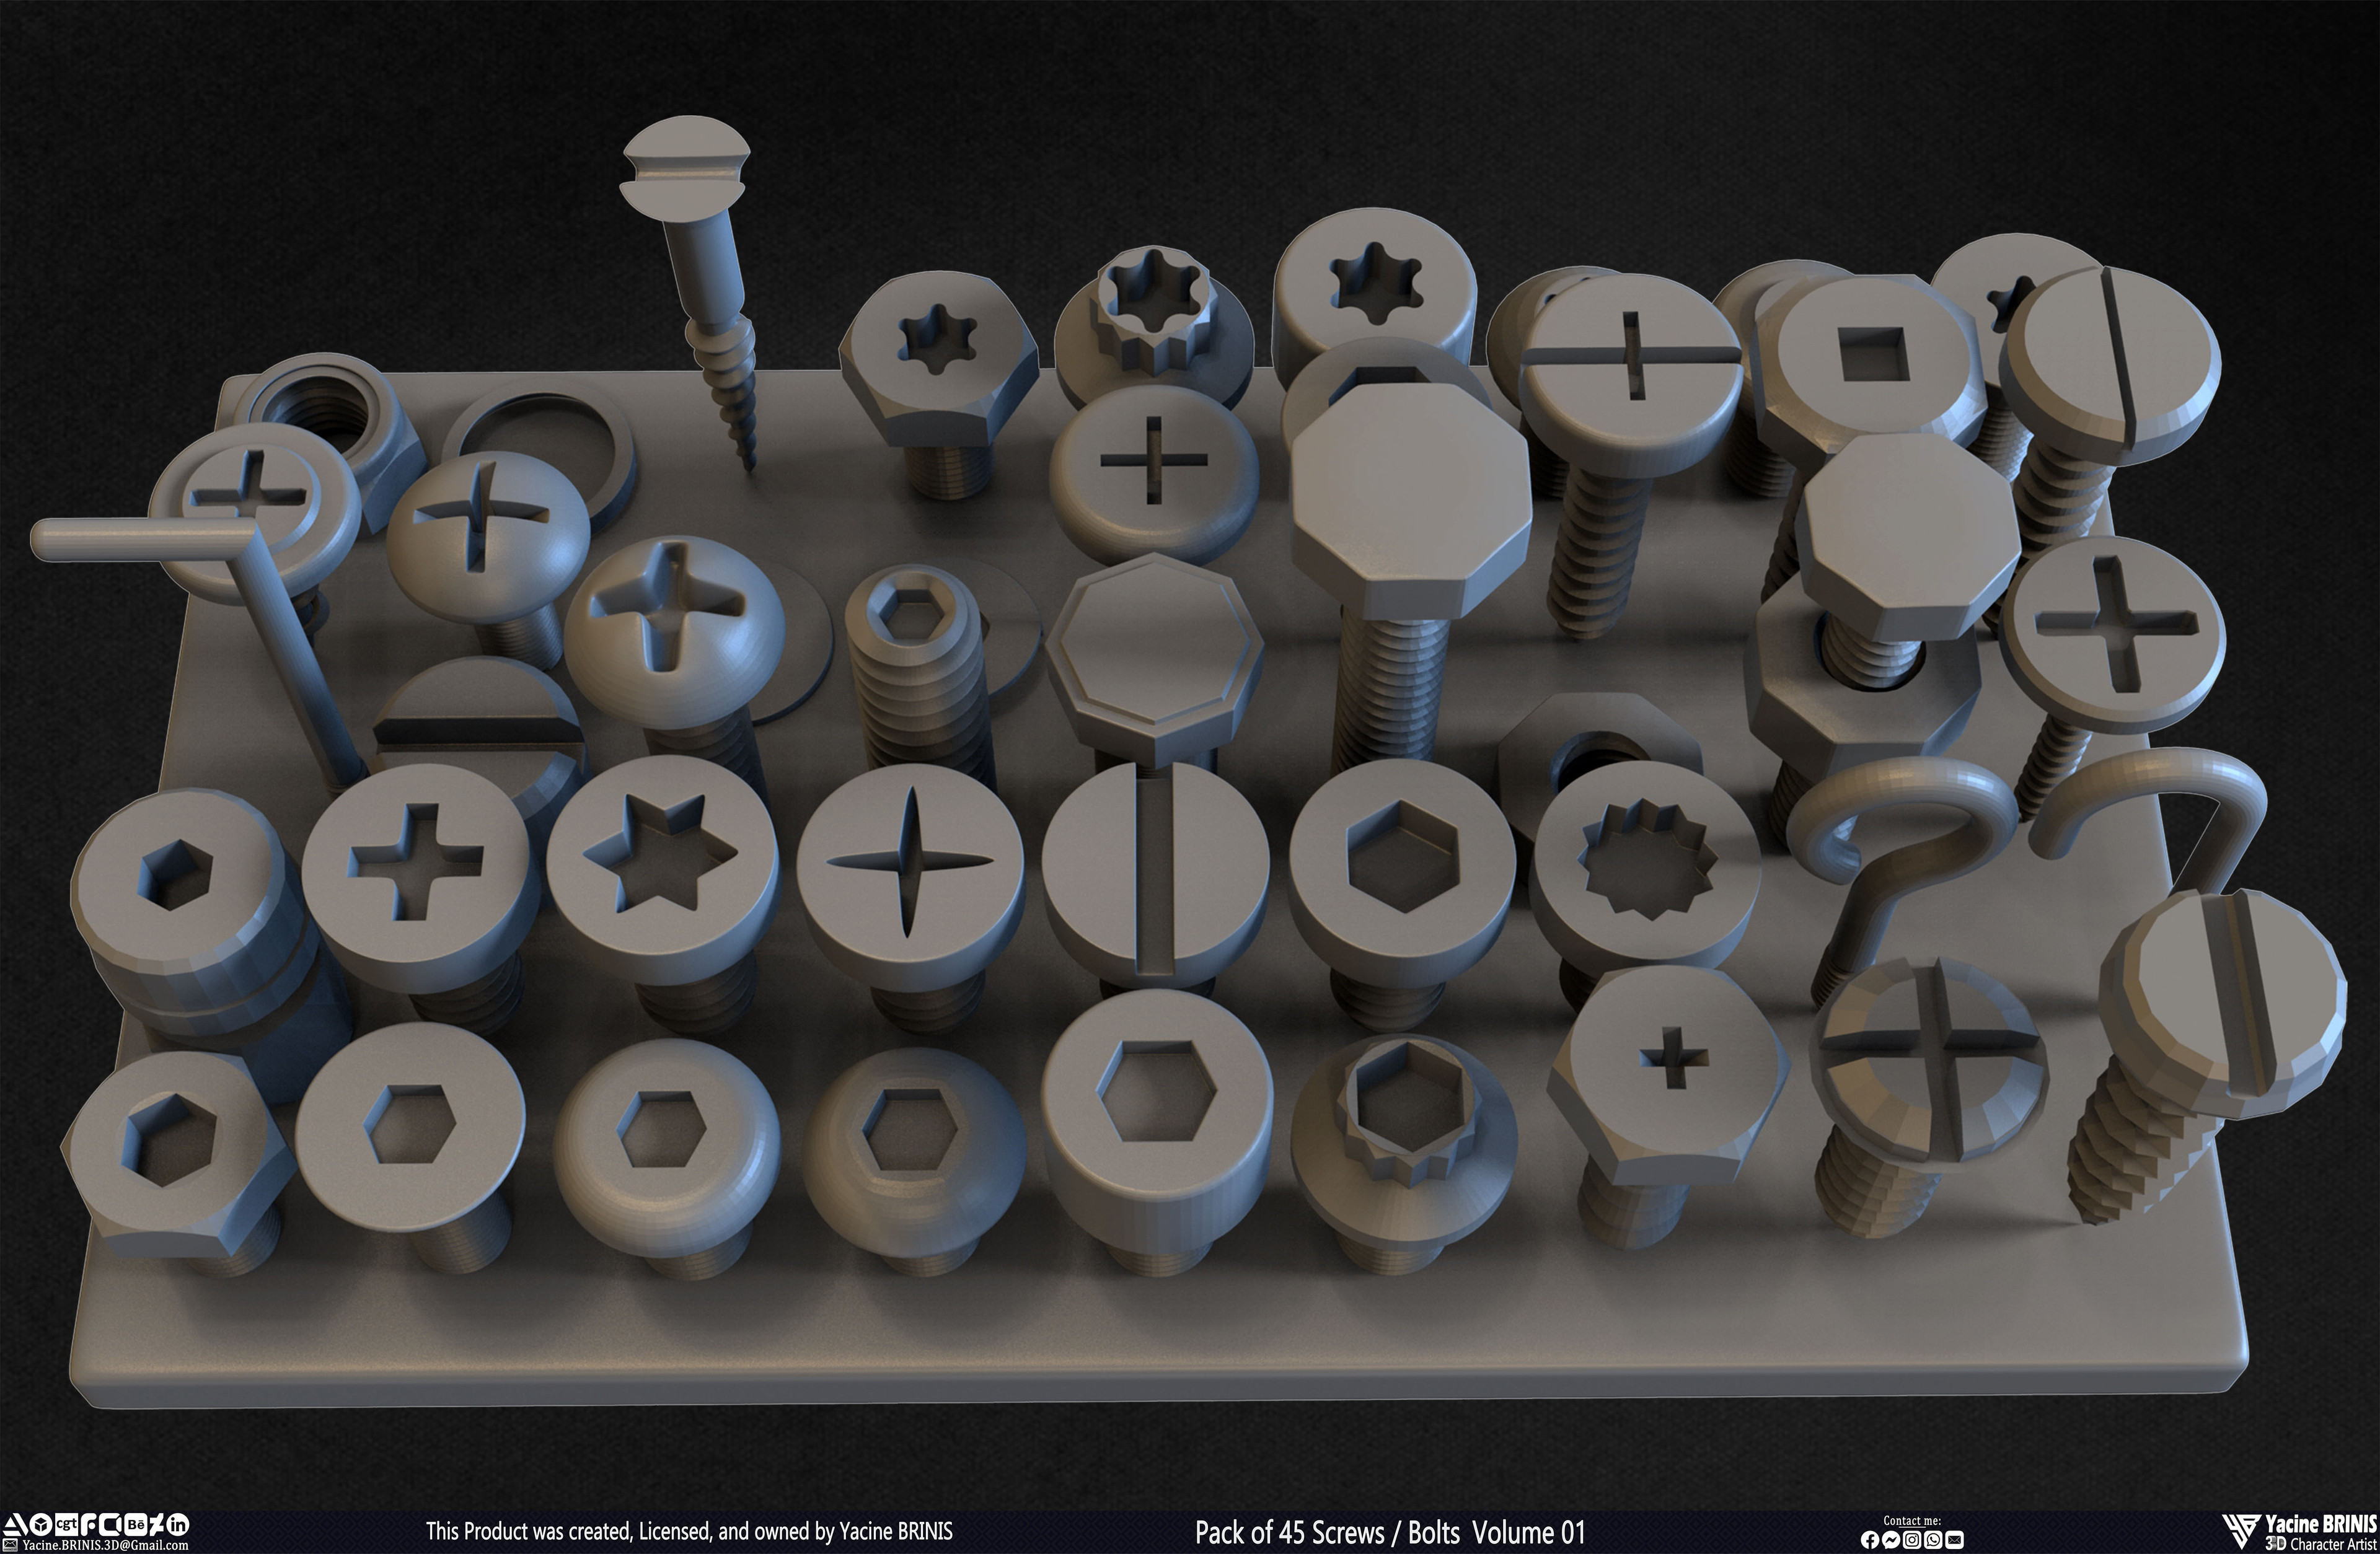 Pack of 45 Screws-Bolts Volume 01 Sculpted By Yacine BRINIS Set 017